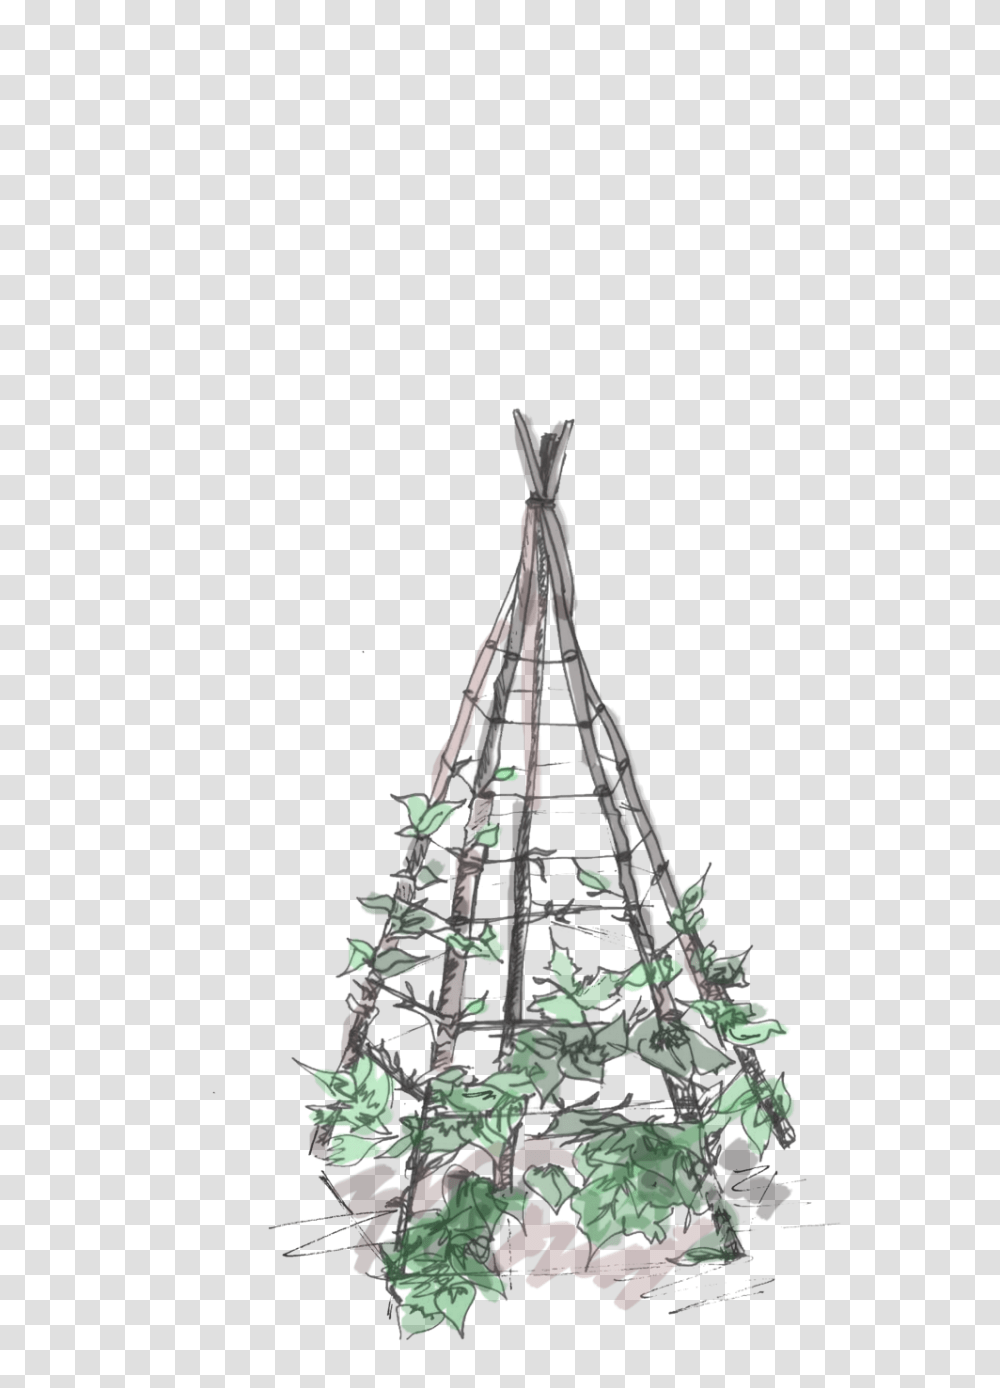 Download Hd Plant Teepee Image Nicepngcom Christmas Tree, Ornament, Outdoors, Nature, Gemstone Transparent Png